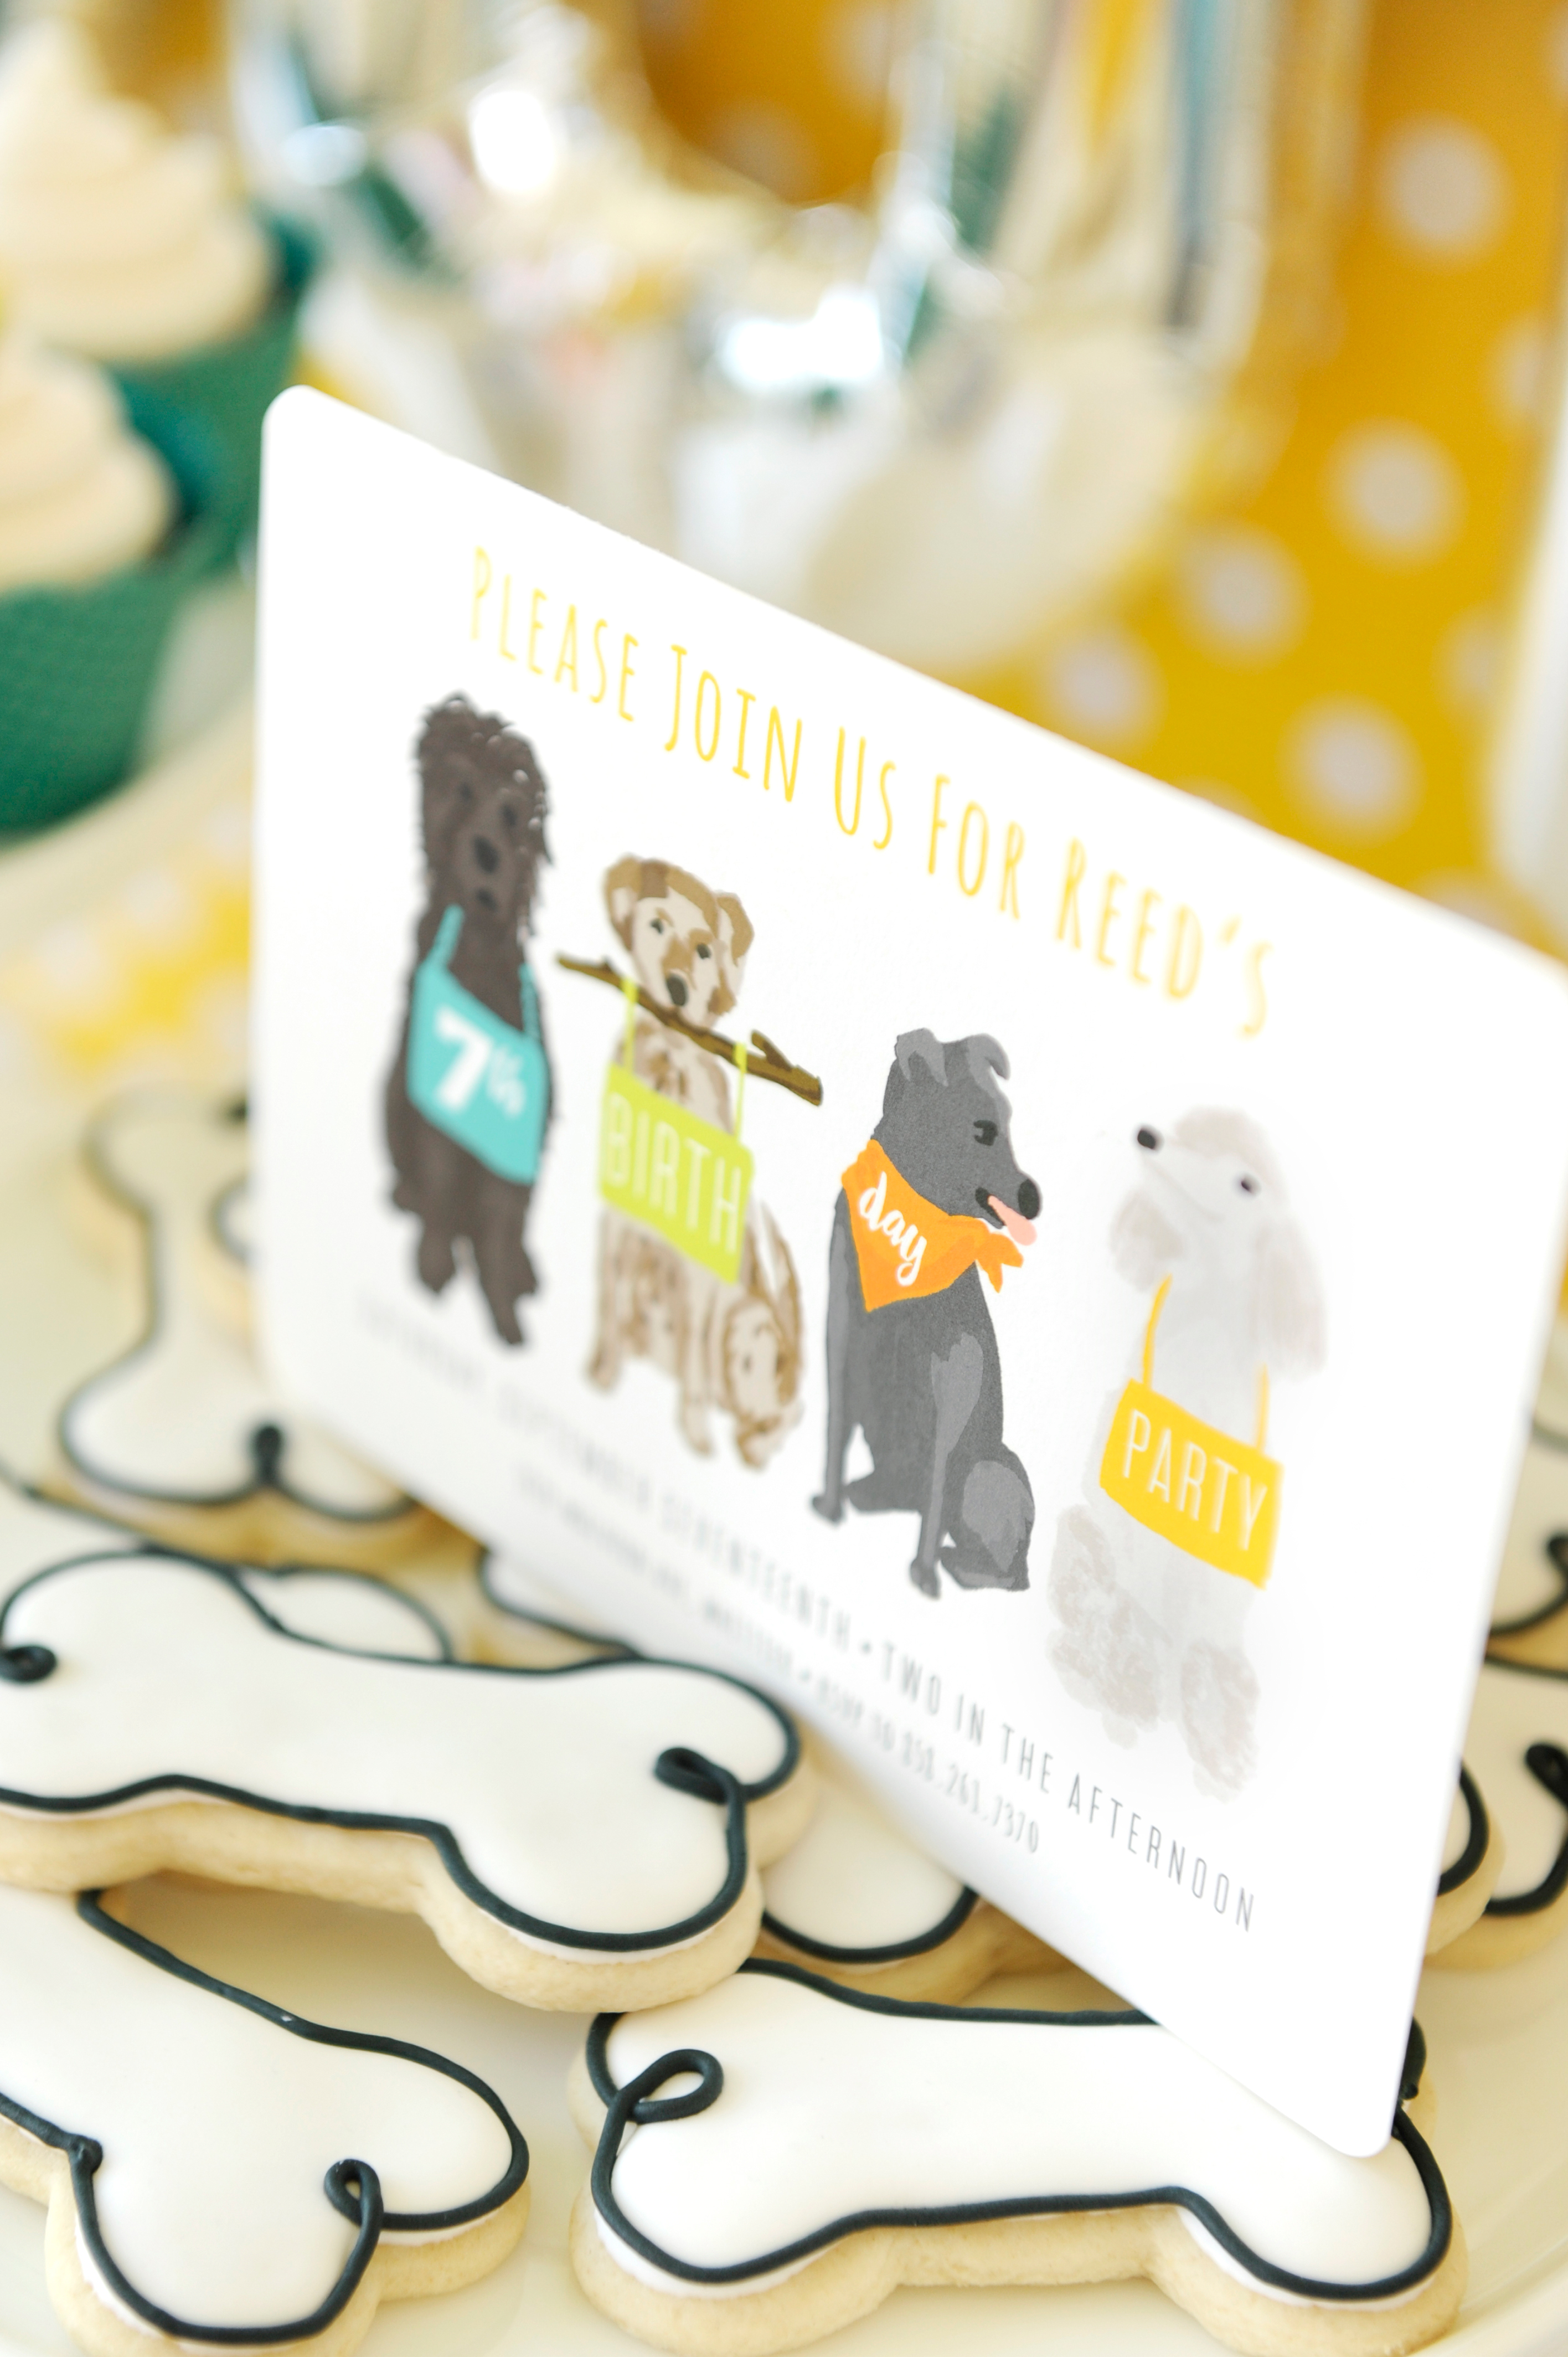 Puppy Themed Party Invitation